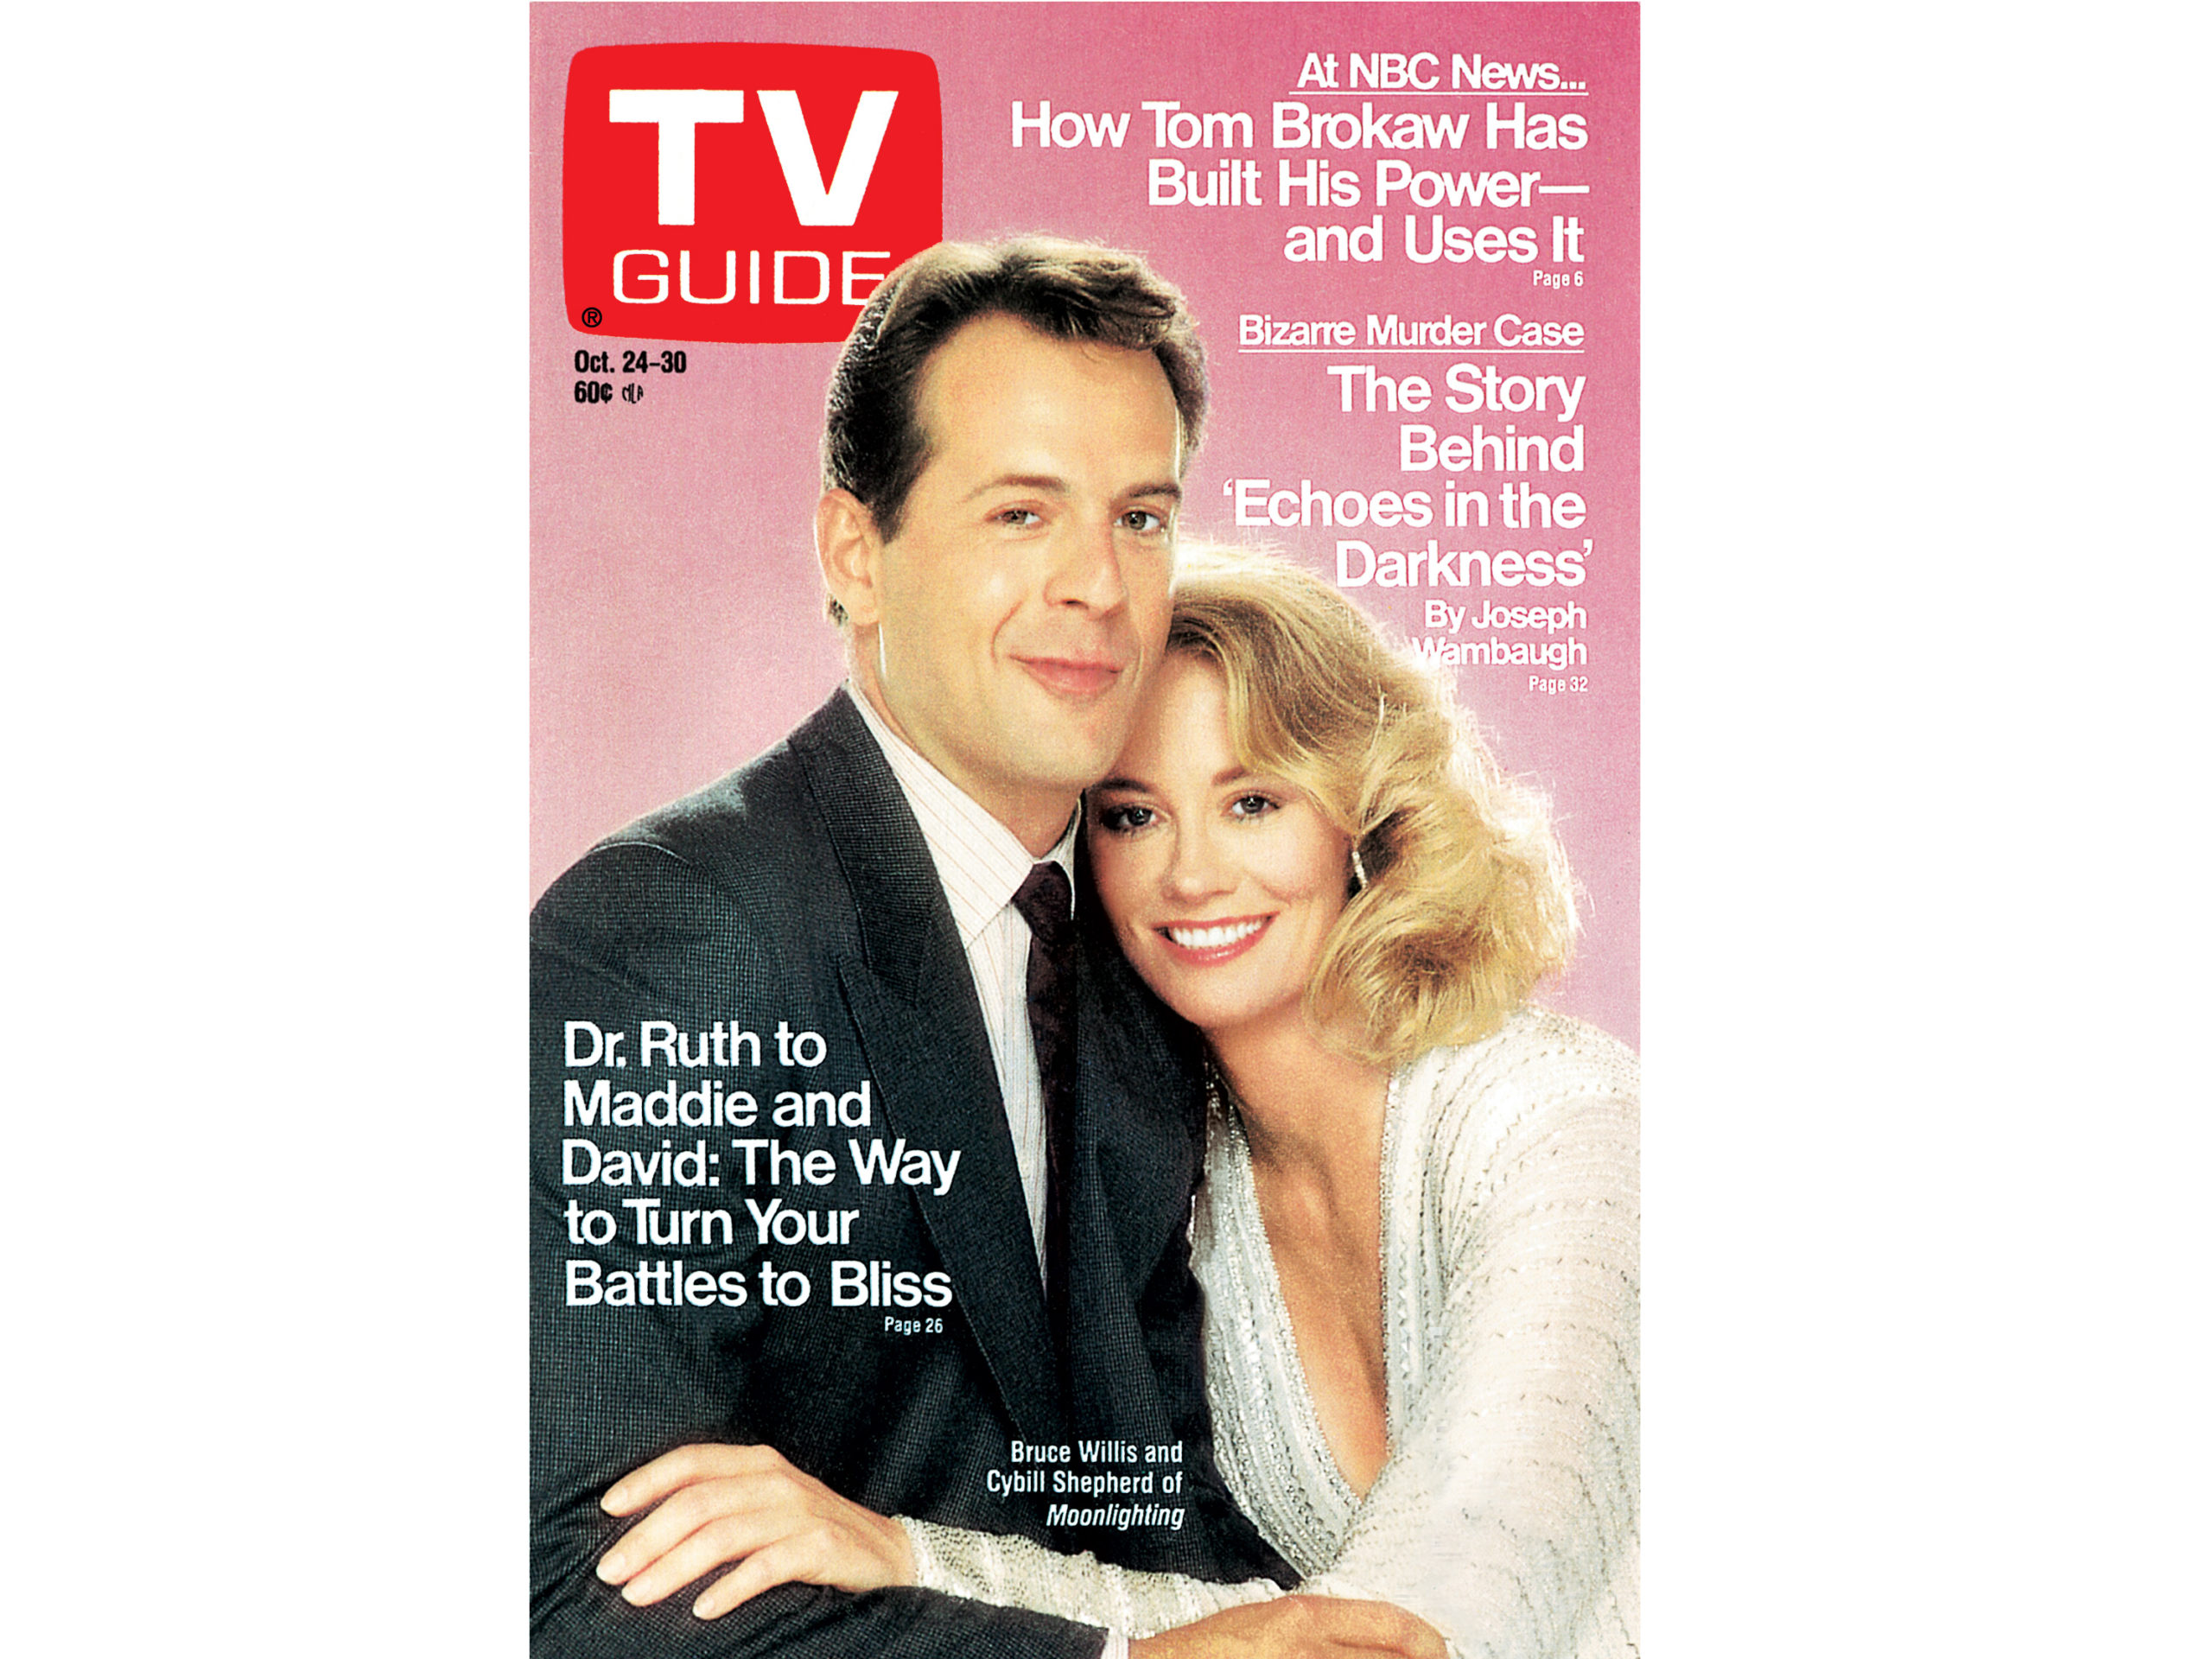 Moonlighting on the cover of TV Guide - Bruce Willis and Cybill Shepherd